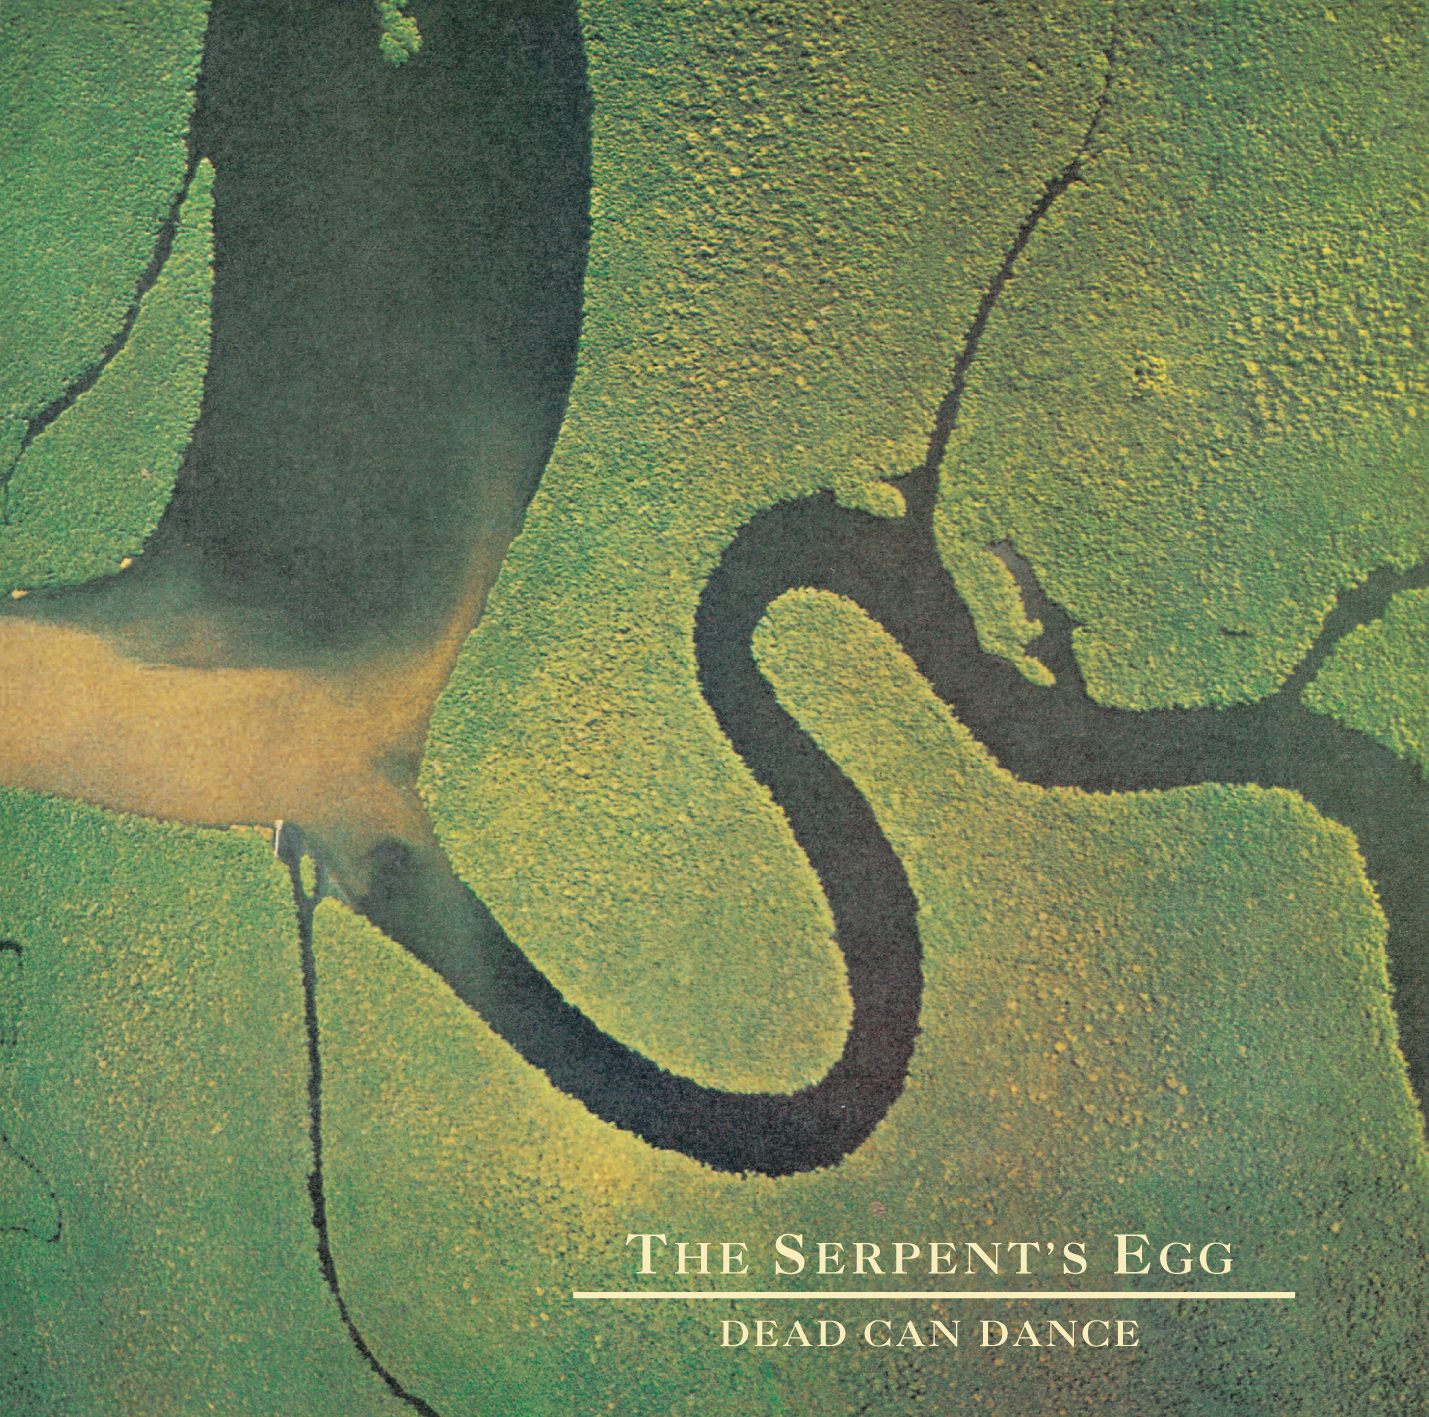 Dead Can Dance - The Serpent's Egg  (Remastered) - CD